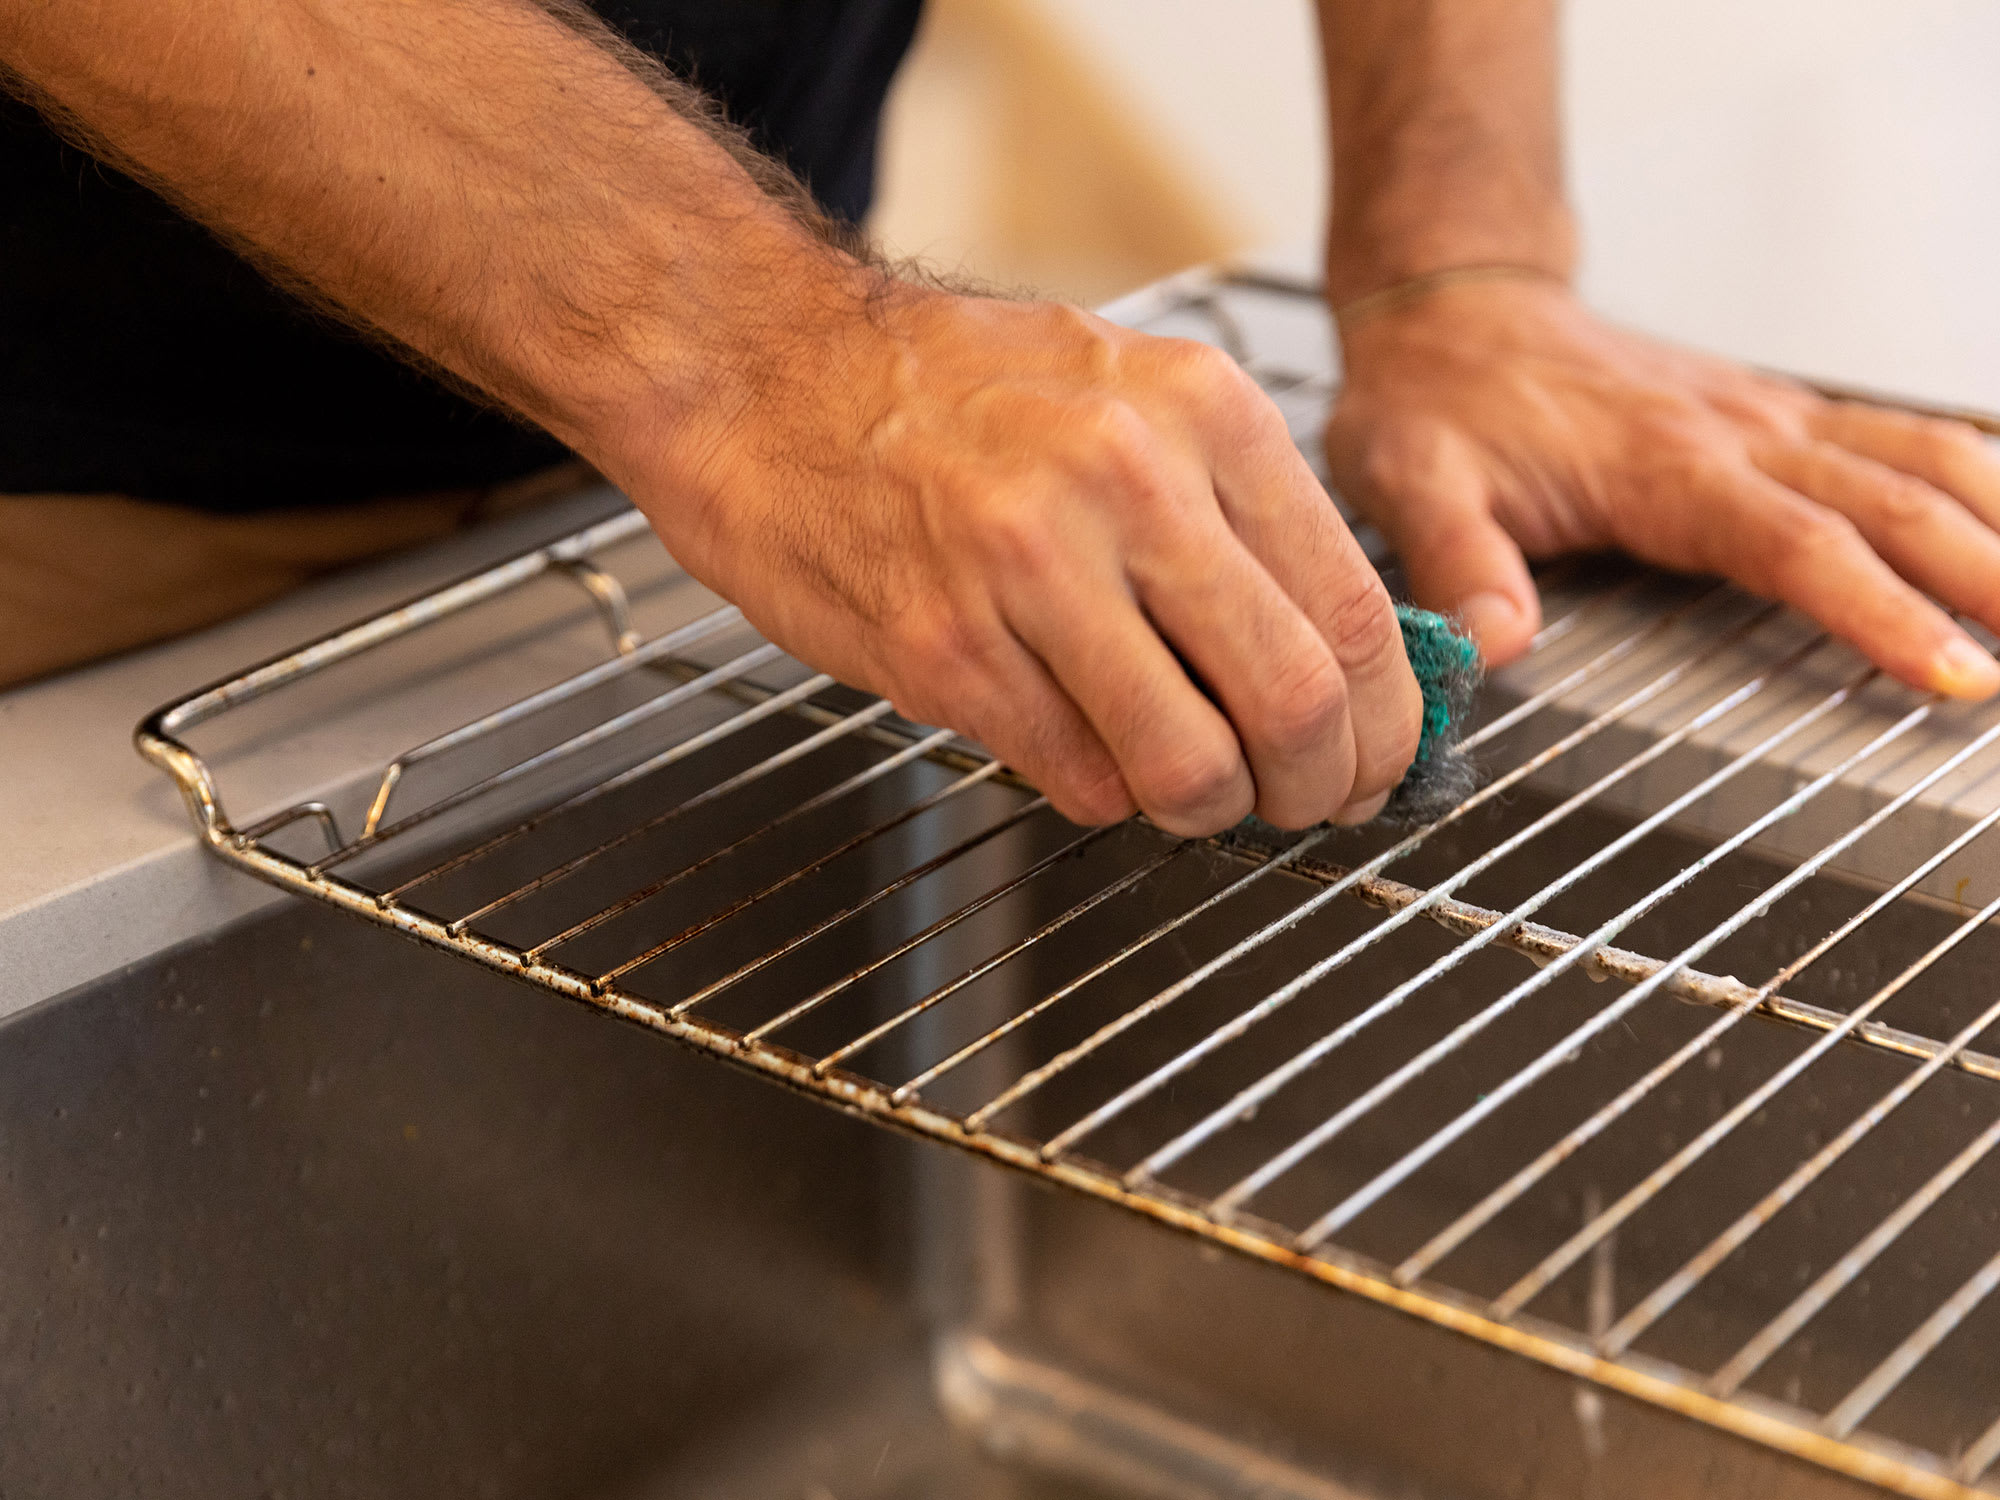 Scrubbing oven racks with scouring pad